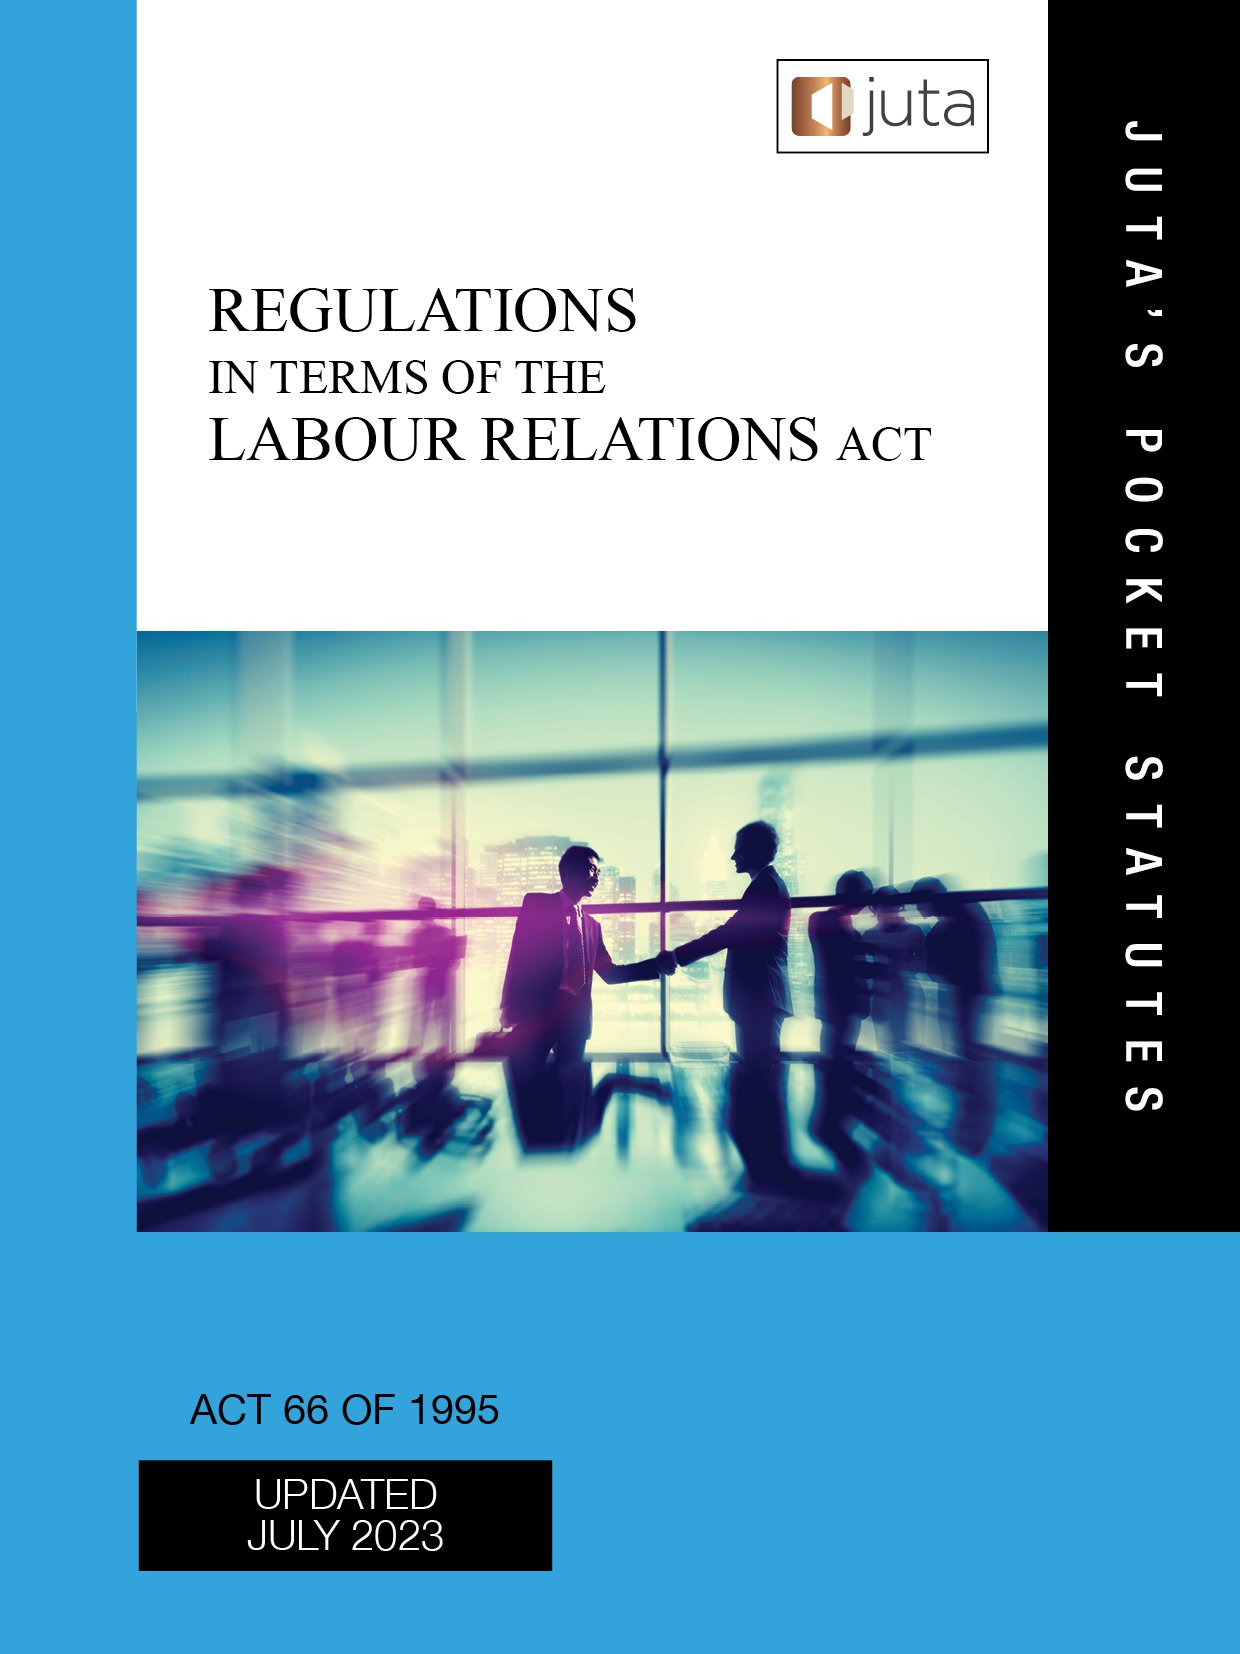 Regulations in terms of the Labour Relations Act 66 of 1995